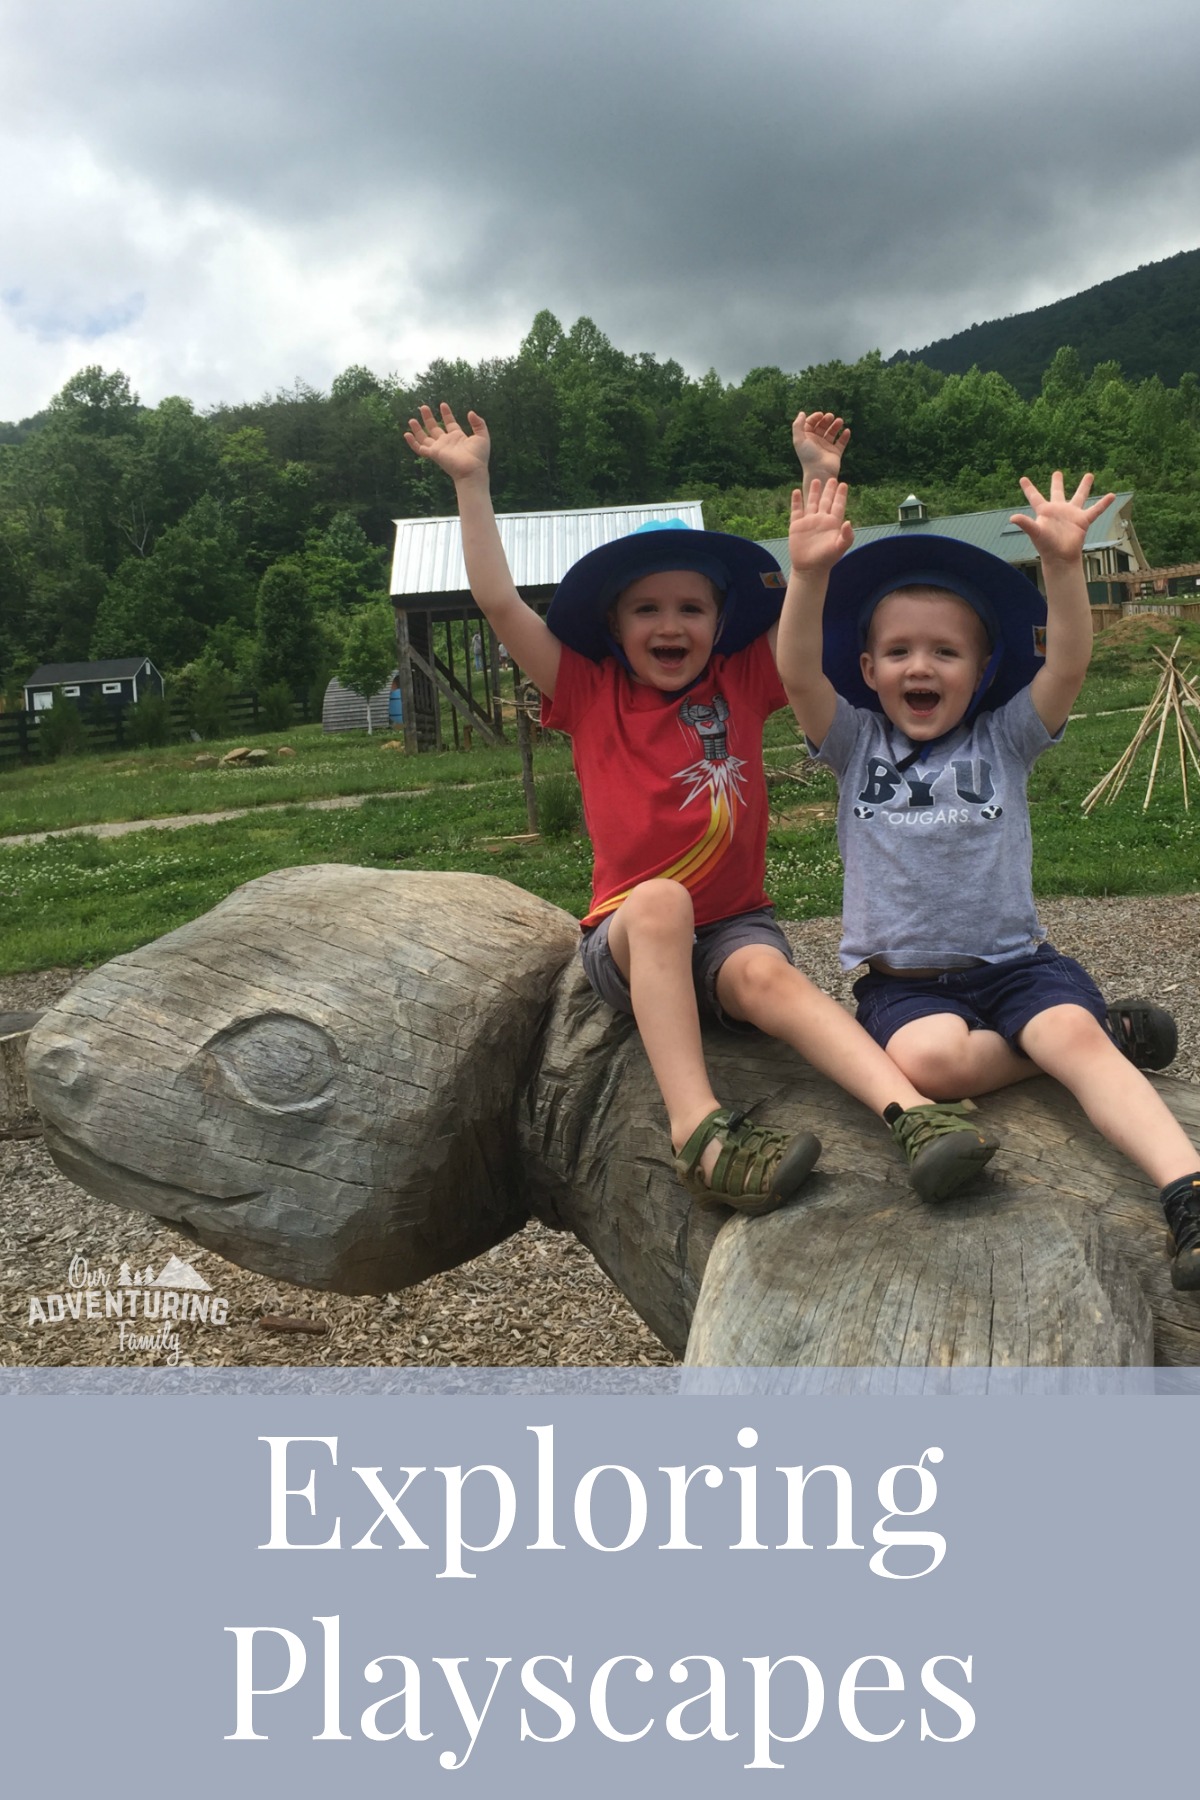 Have you ever been to a playscape? What is a playscape? Here in central Virginia we have two different playscapes that we've visited and enjoyed. Go to ouradventuringfamily.com to find out what a playscape is and why we like them.